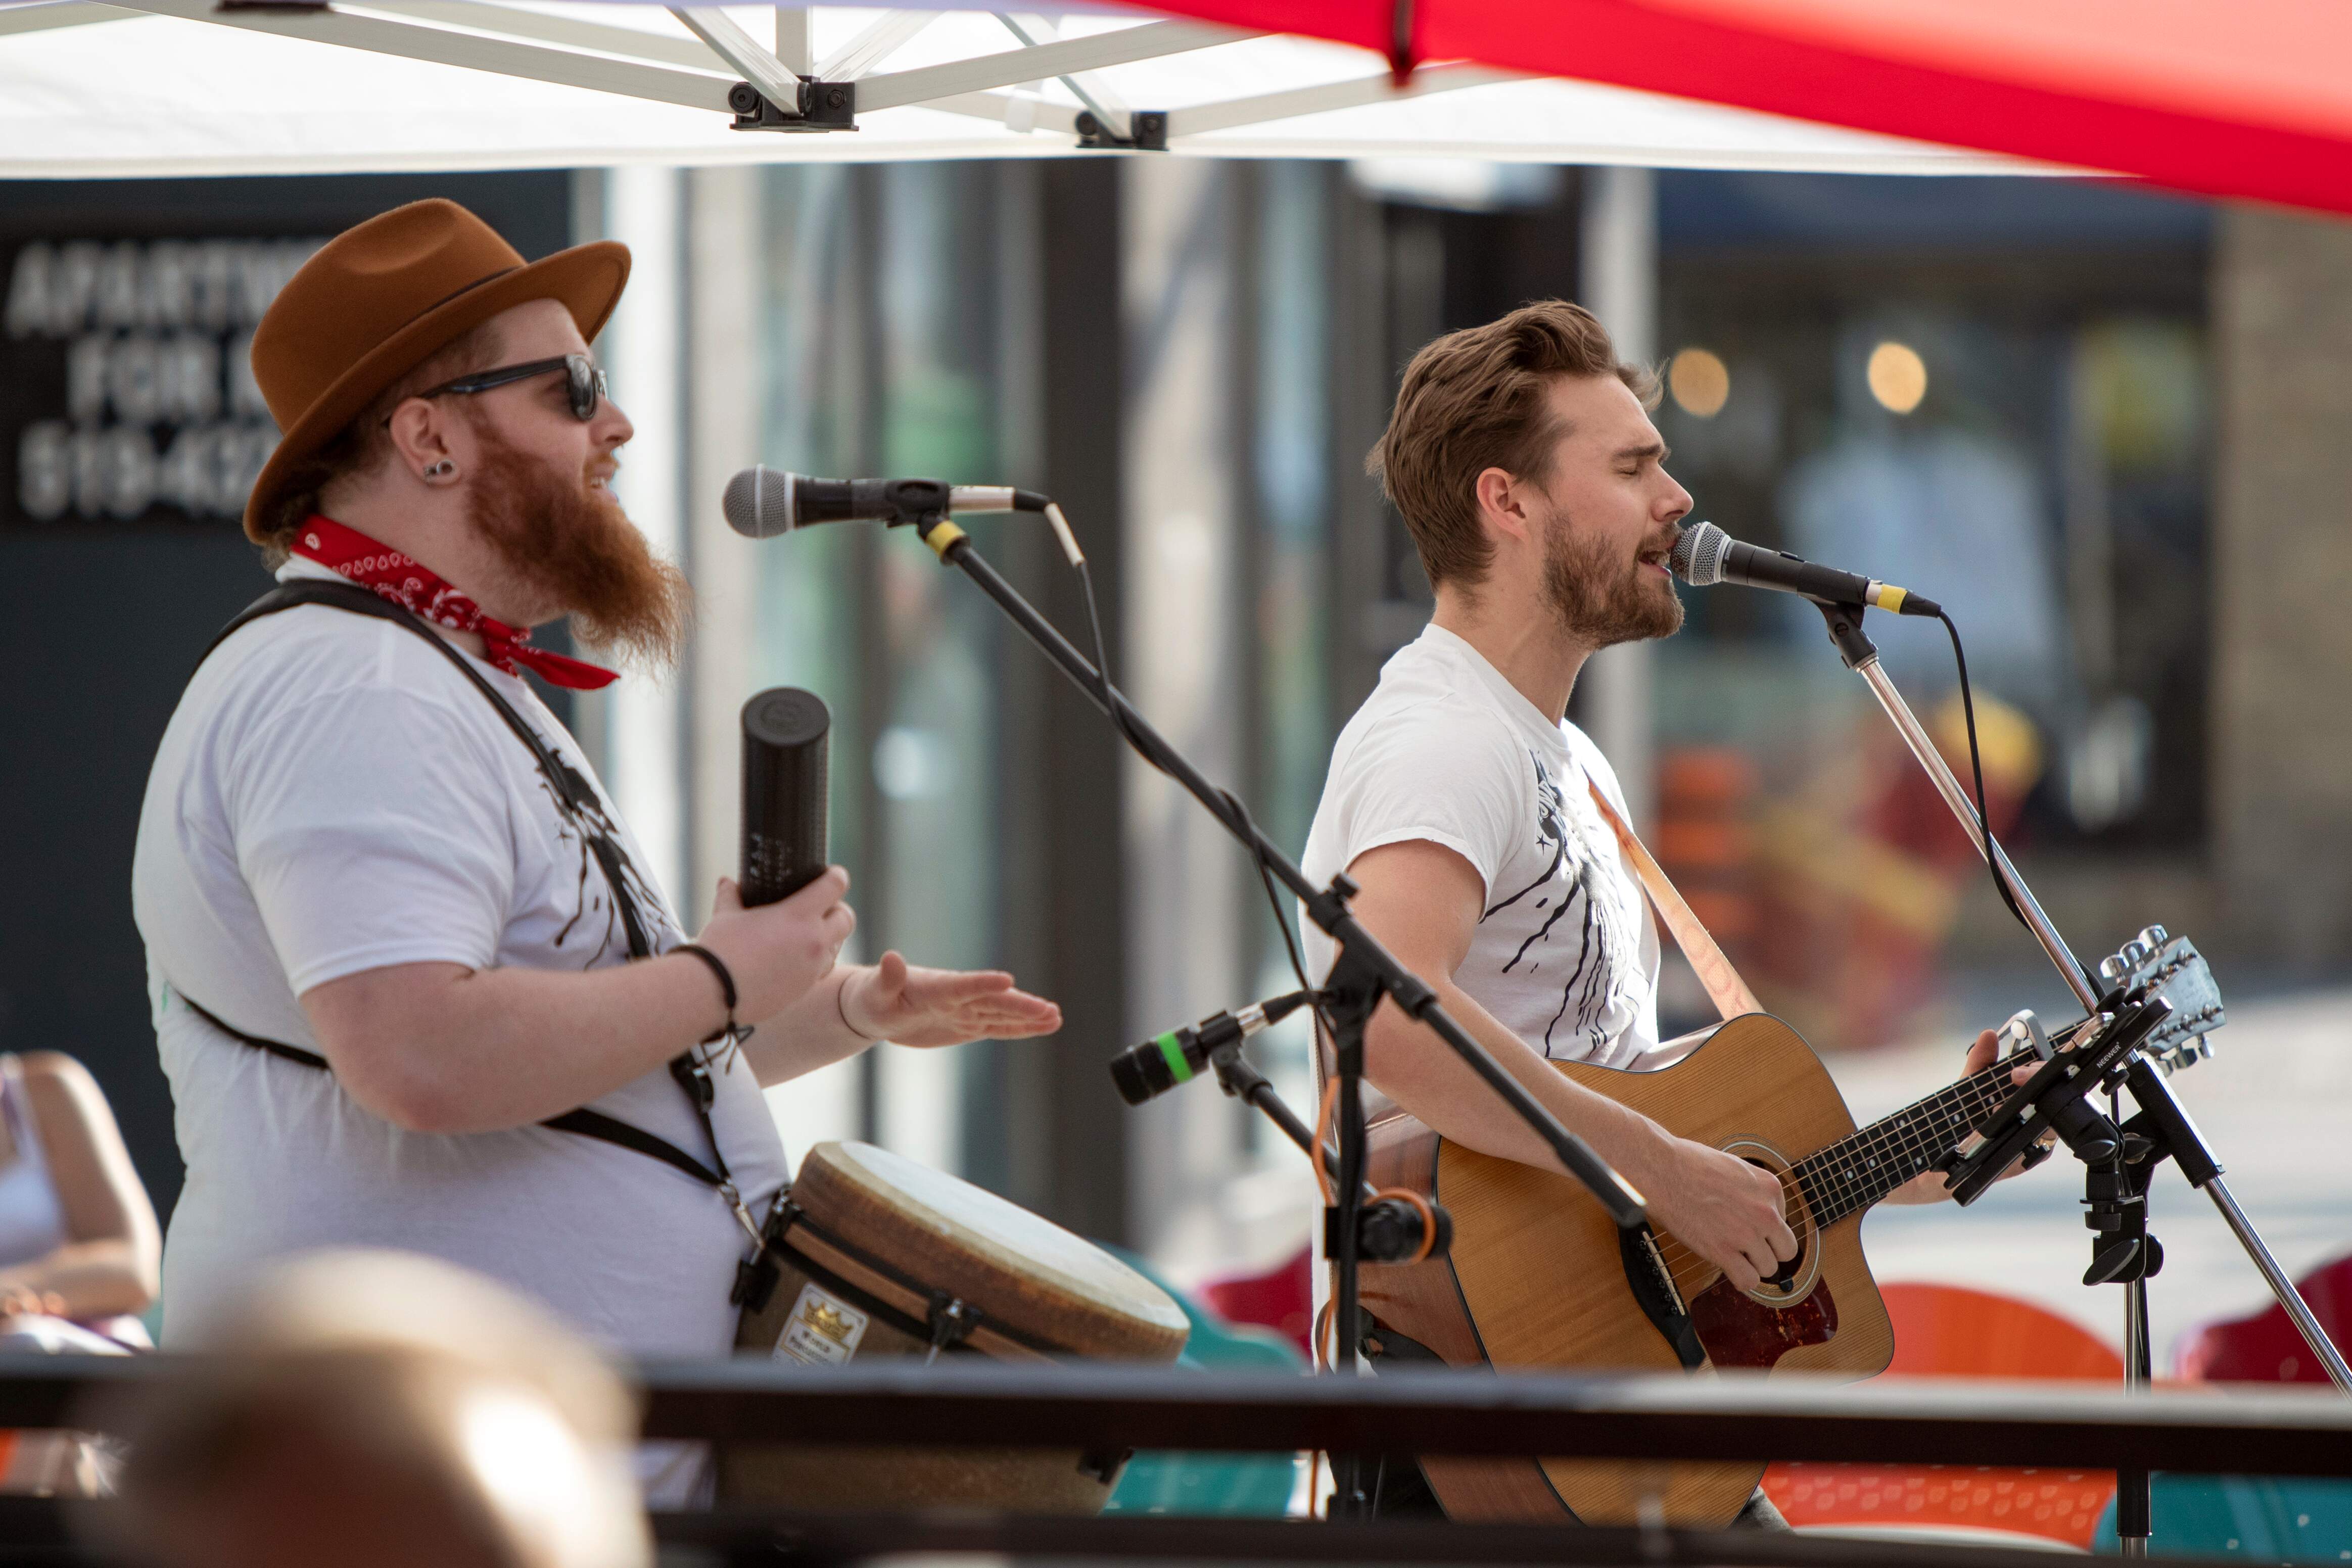 Musicians performing on Dundas Place’s sidewalk earlier this July. As businesses are reopening, additional programming is being planned for both weekdays and weekends each week. Some of this programming will now be extended into the street.